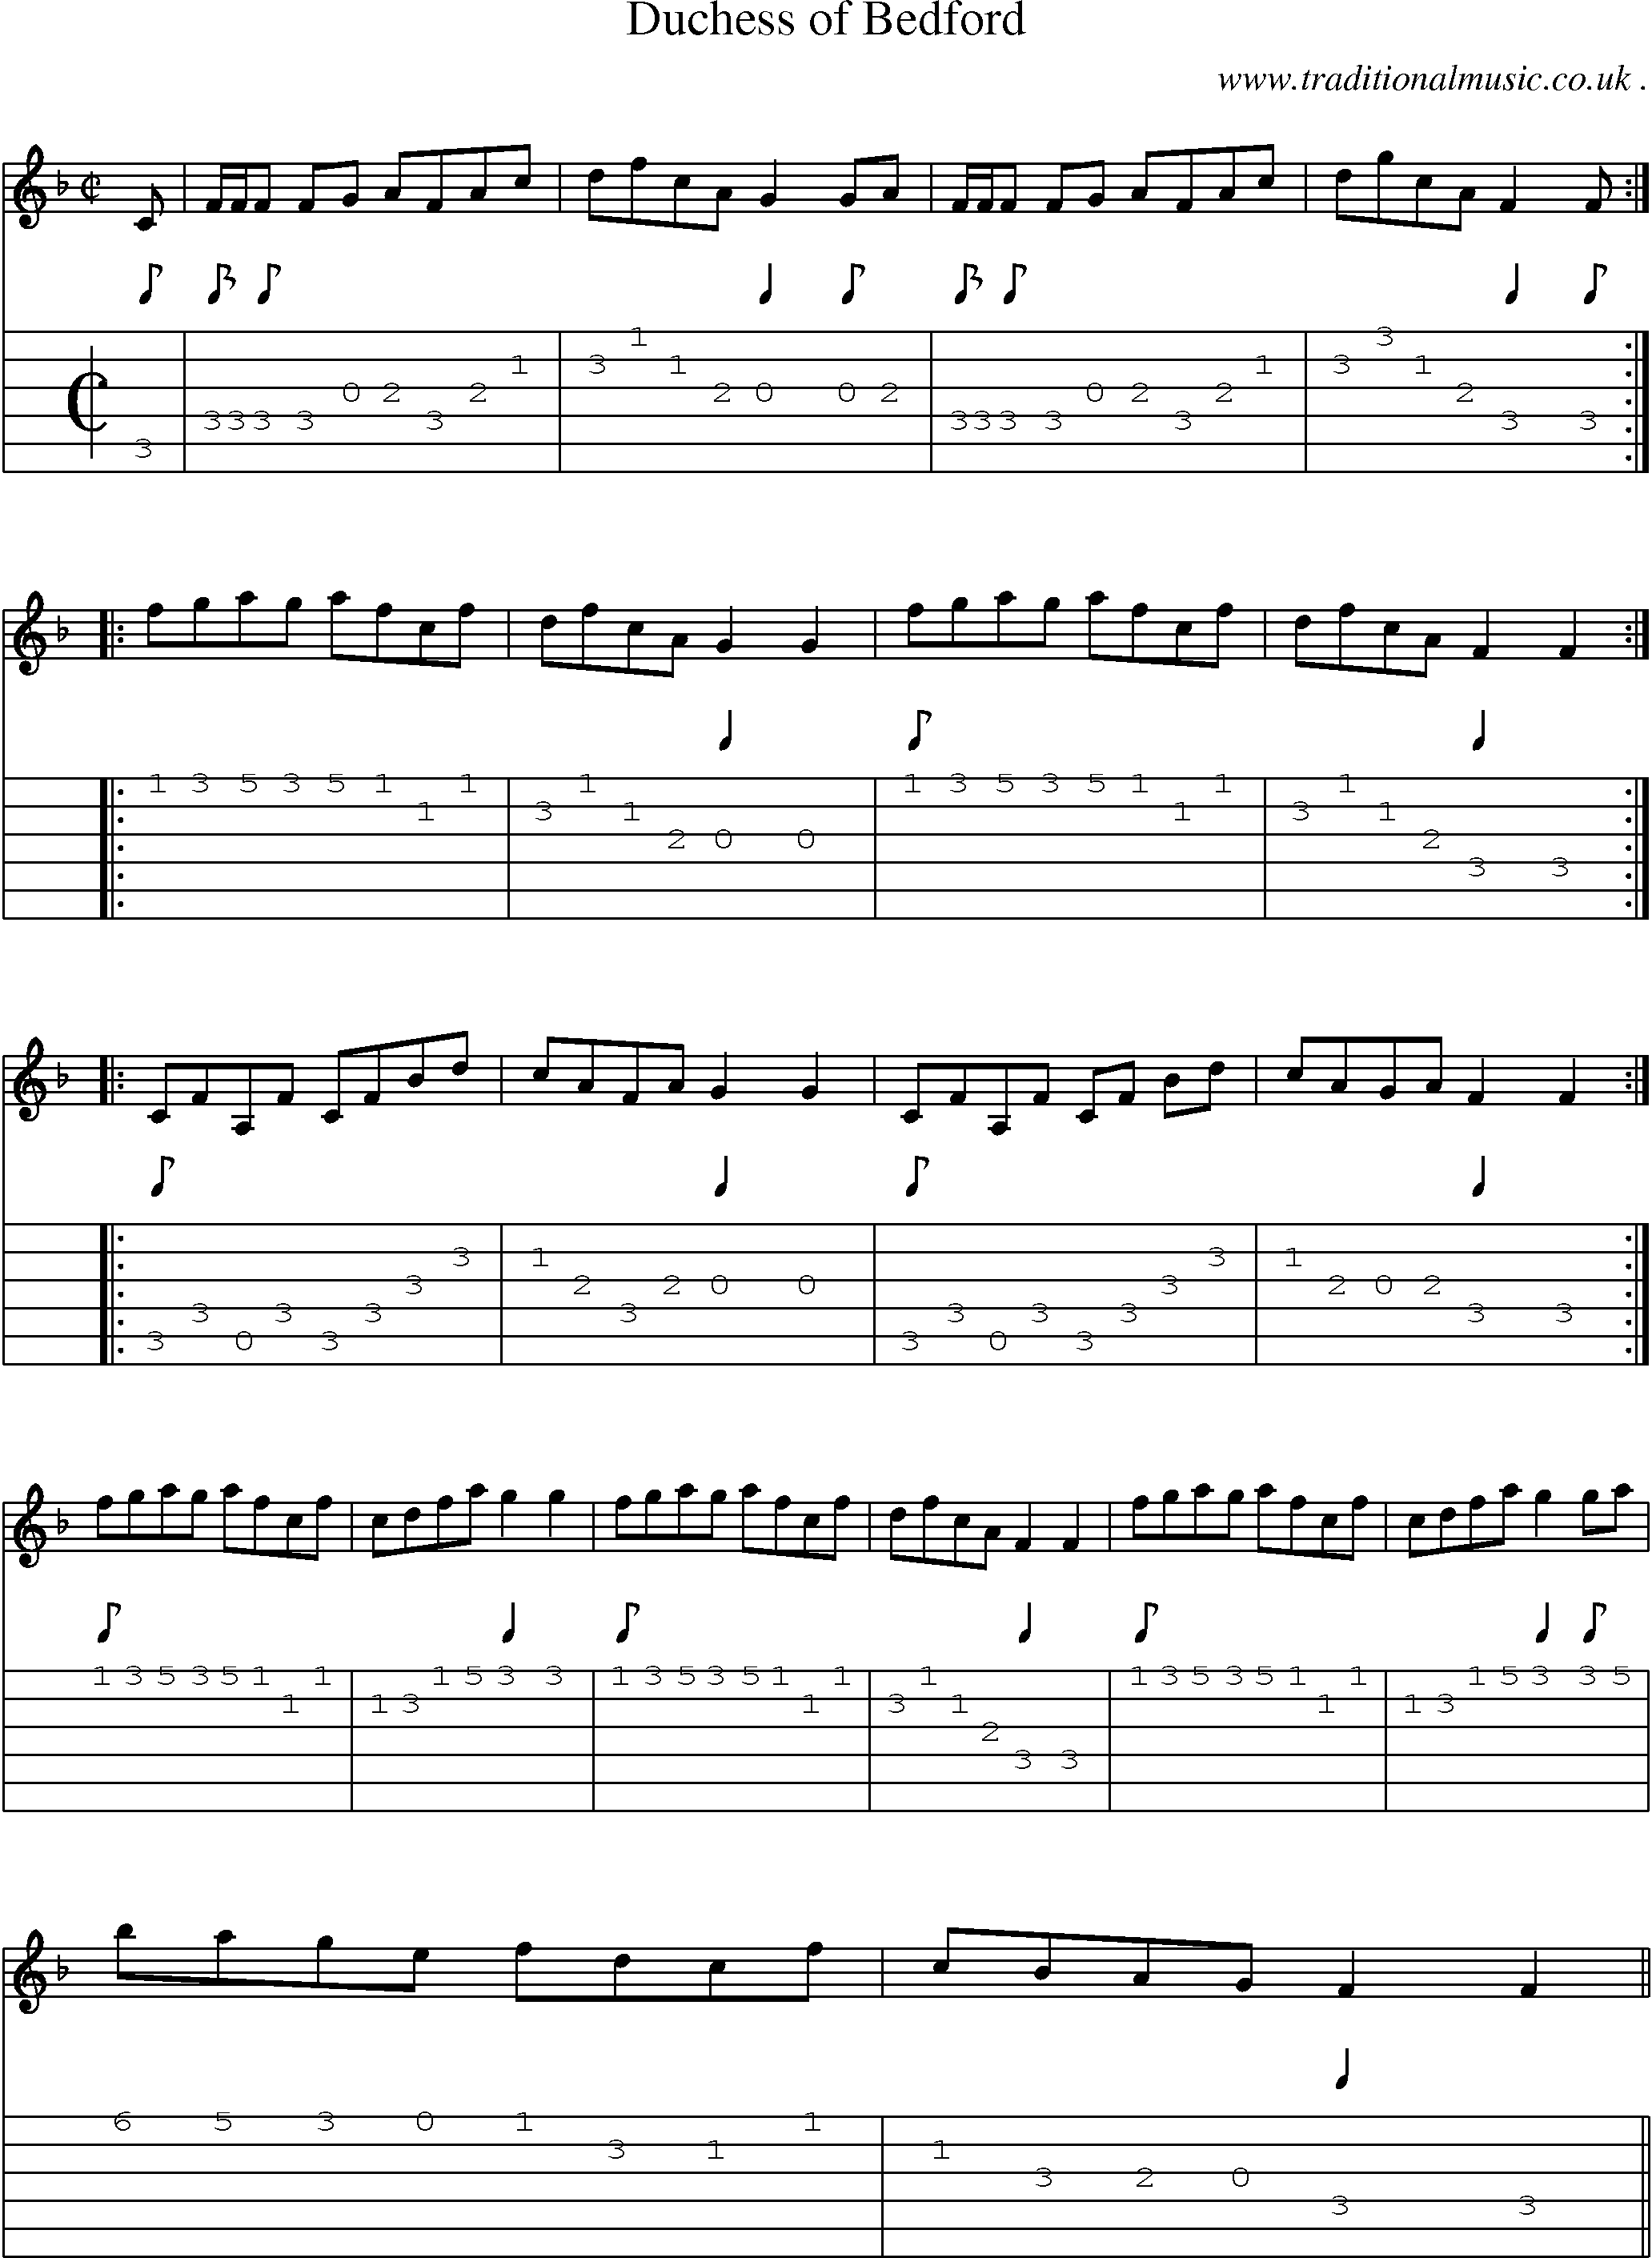 Sheet-music  score, Chords and Guitar Tabs for Duchess Of Bedford